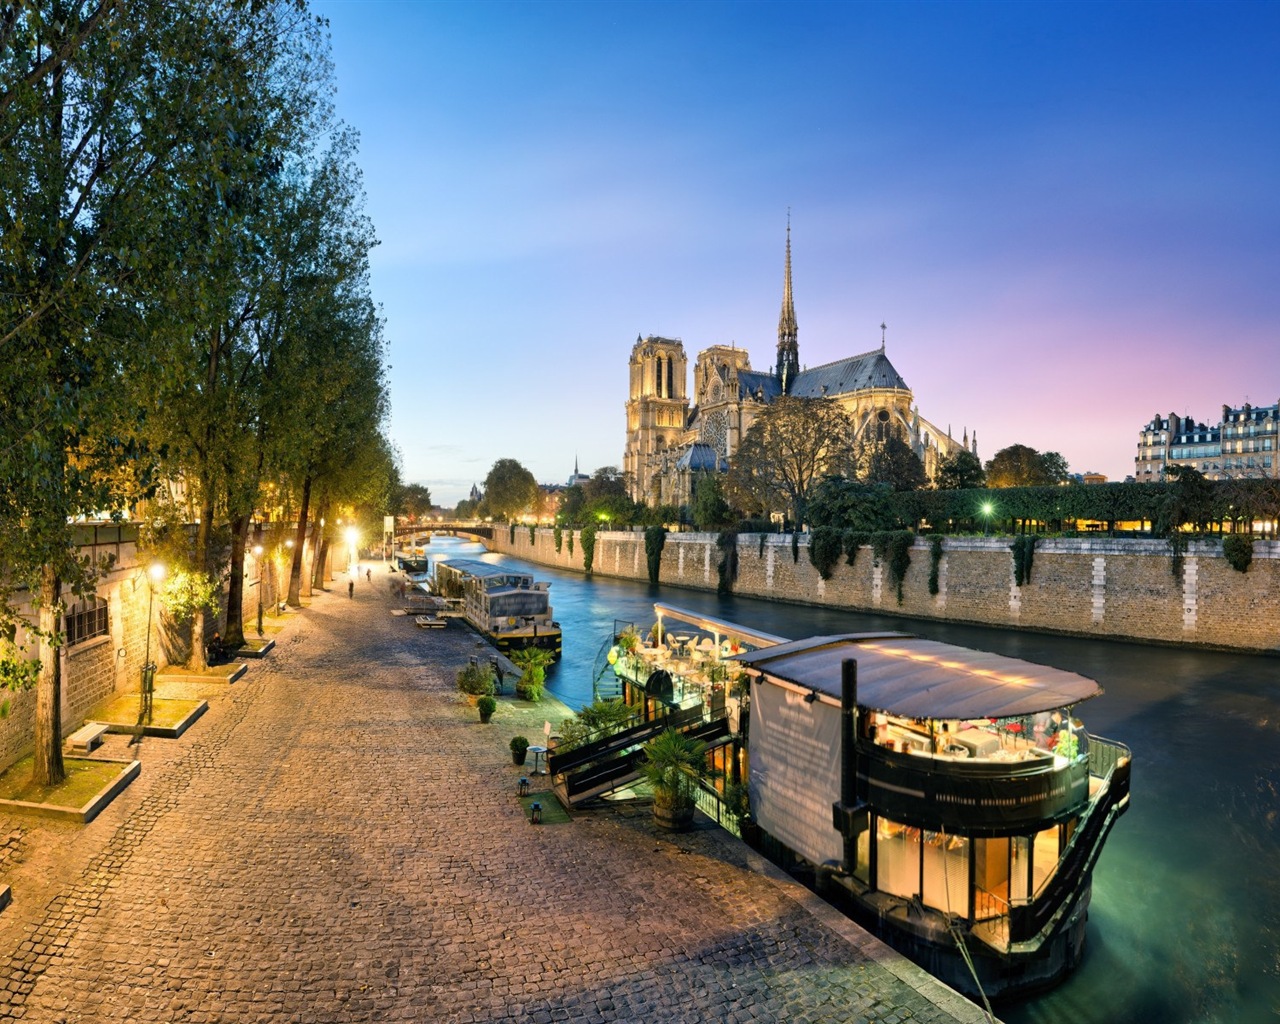 Notre Dame HD Wallpapers #3 - 1280x1024